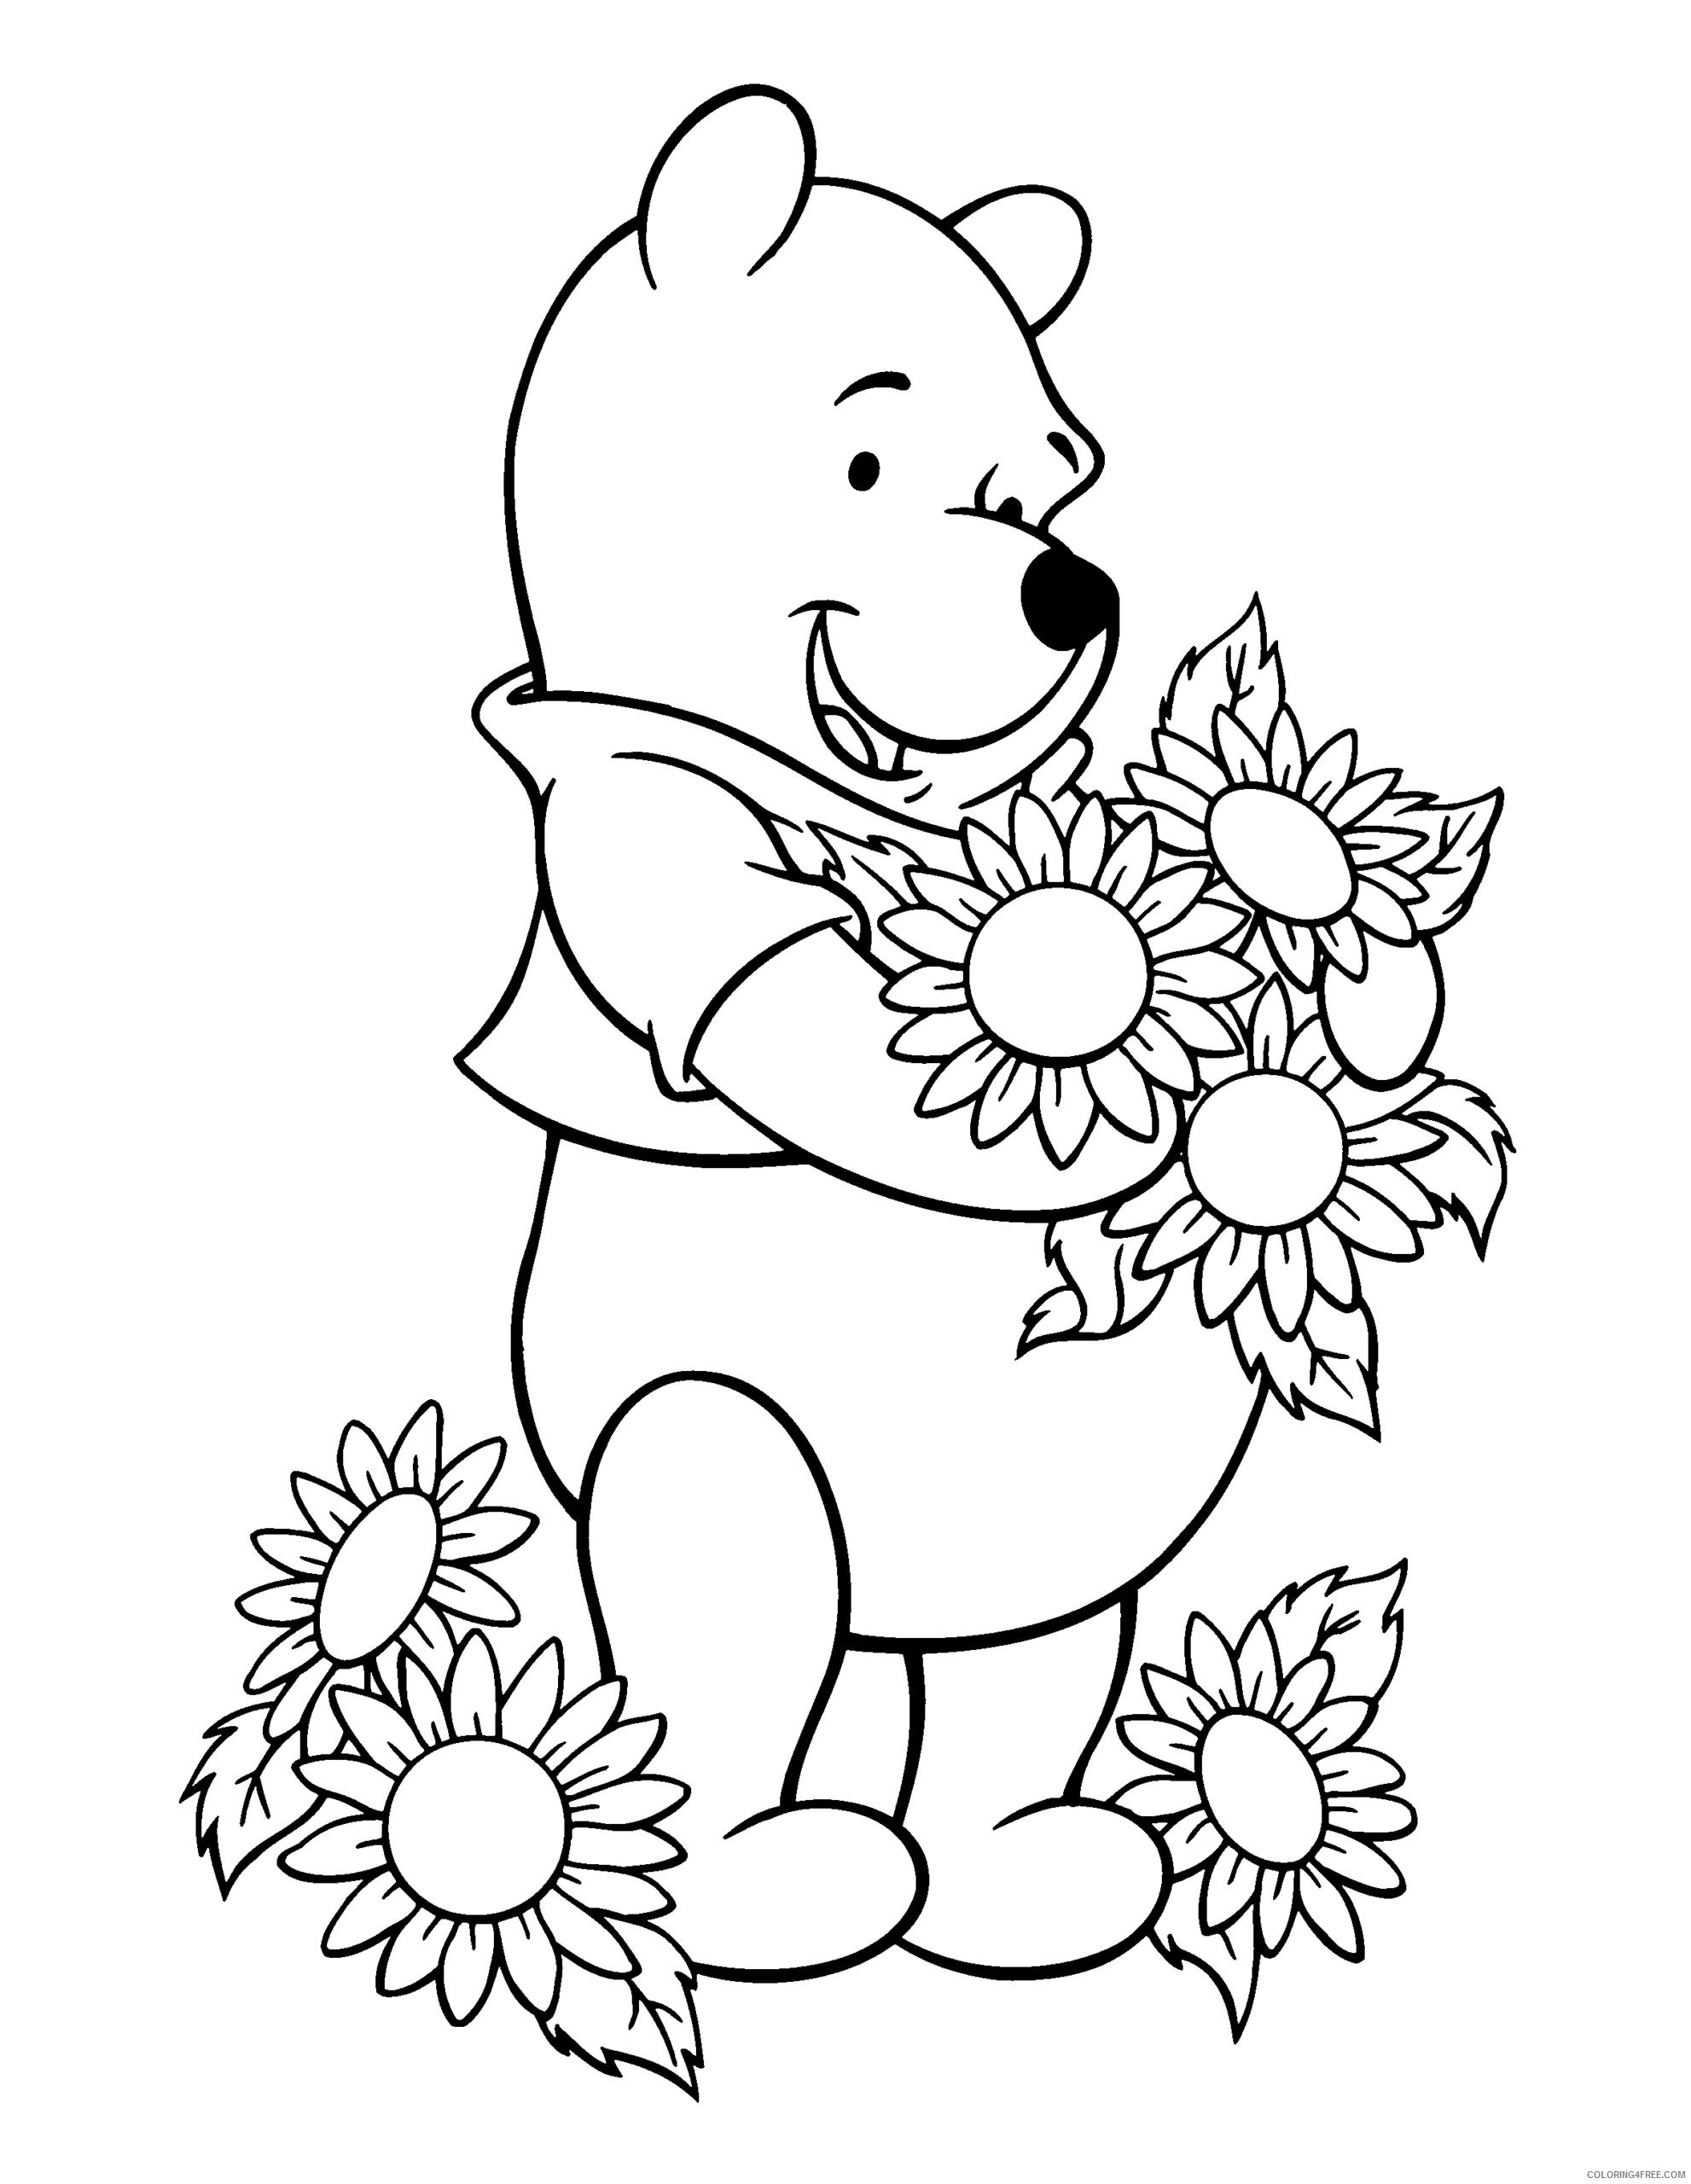 Winnie the Pooh Coloring Pages Cartoons_pooh and flowers a4 Printable 2020 6921 Coloring4free